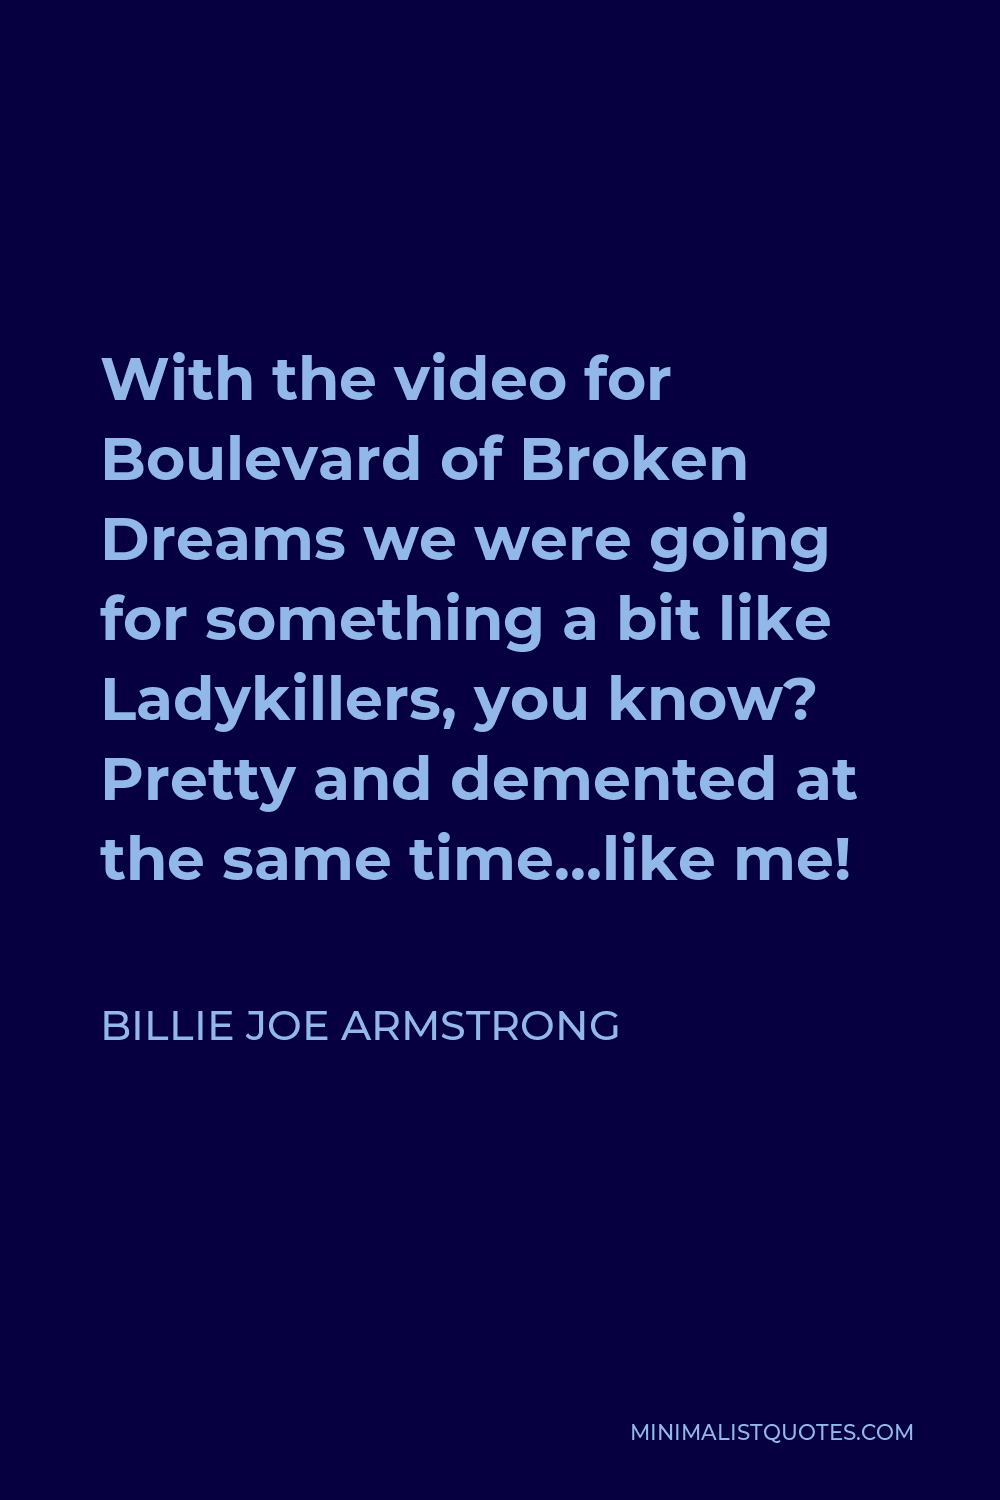 Billie Joe Armstrong Quote - With the video for Boulevard of Broken Dreams we were going for something a bit like Ladykillers, you know? Pretty and demented at the same time…like me!